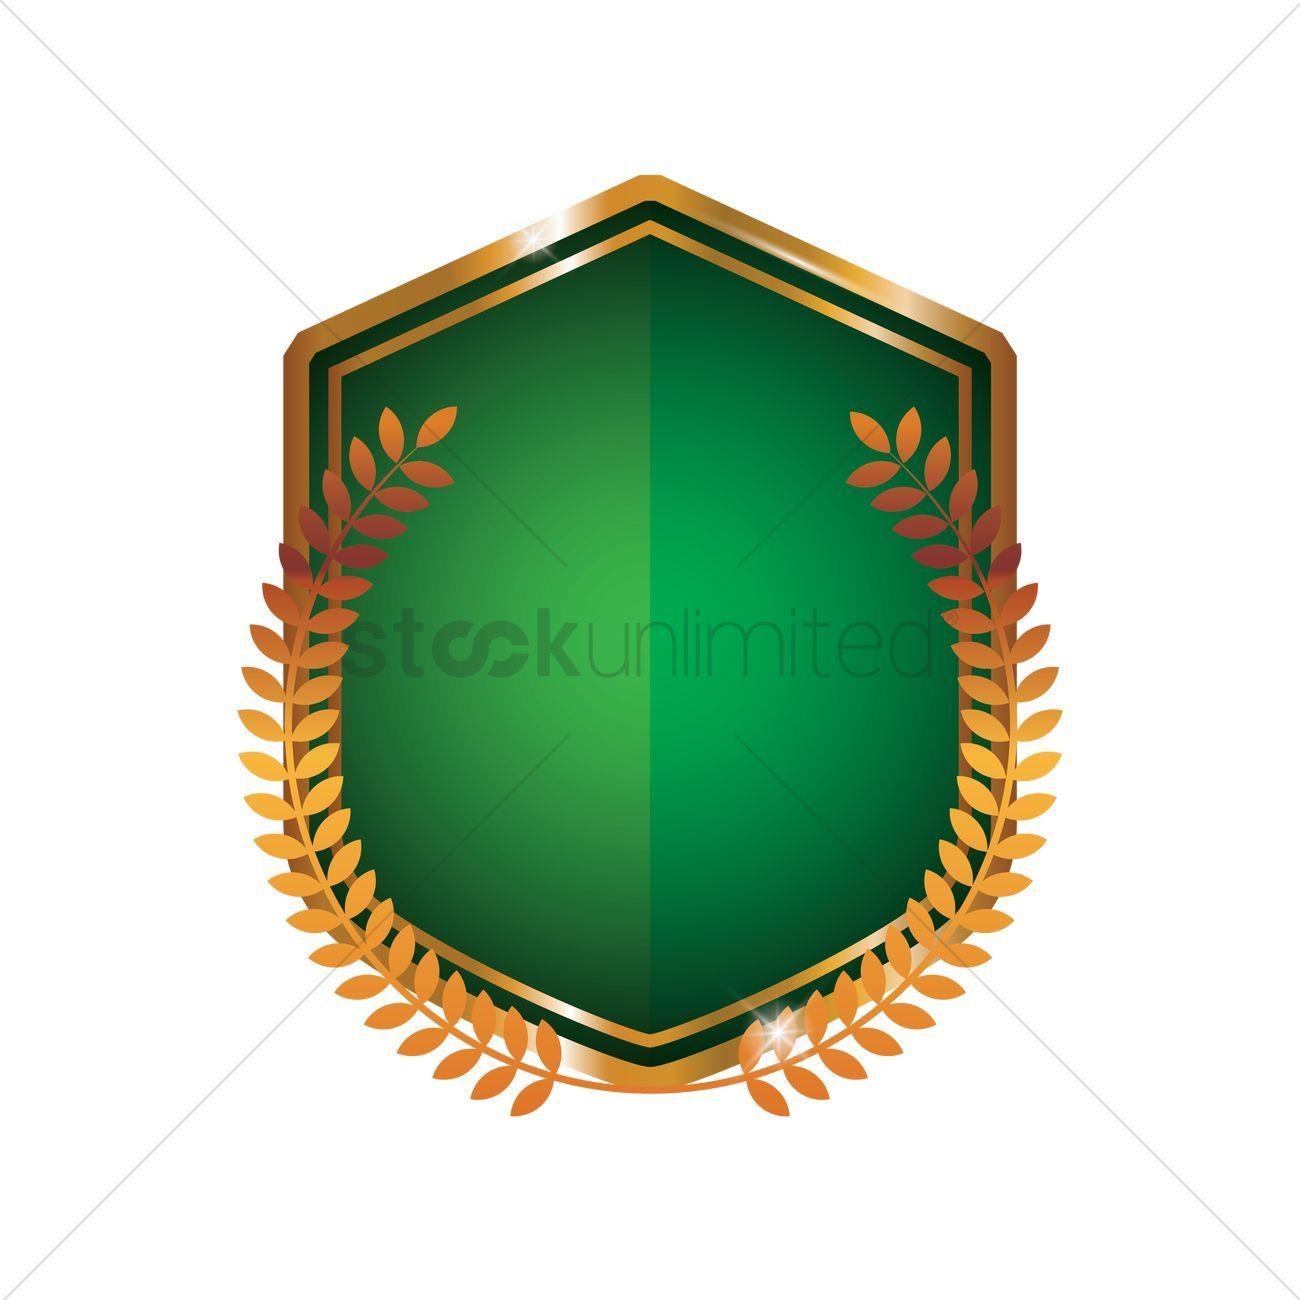 Who Has a Green and Red Shield Logo - Green shield emblem Vector Image - 1874318 | StockUnlimited